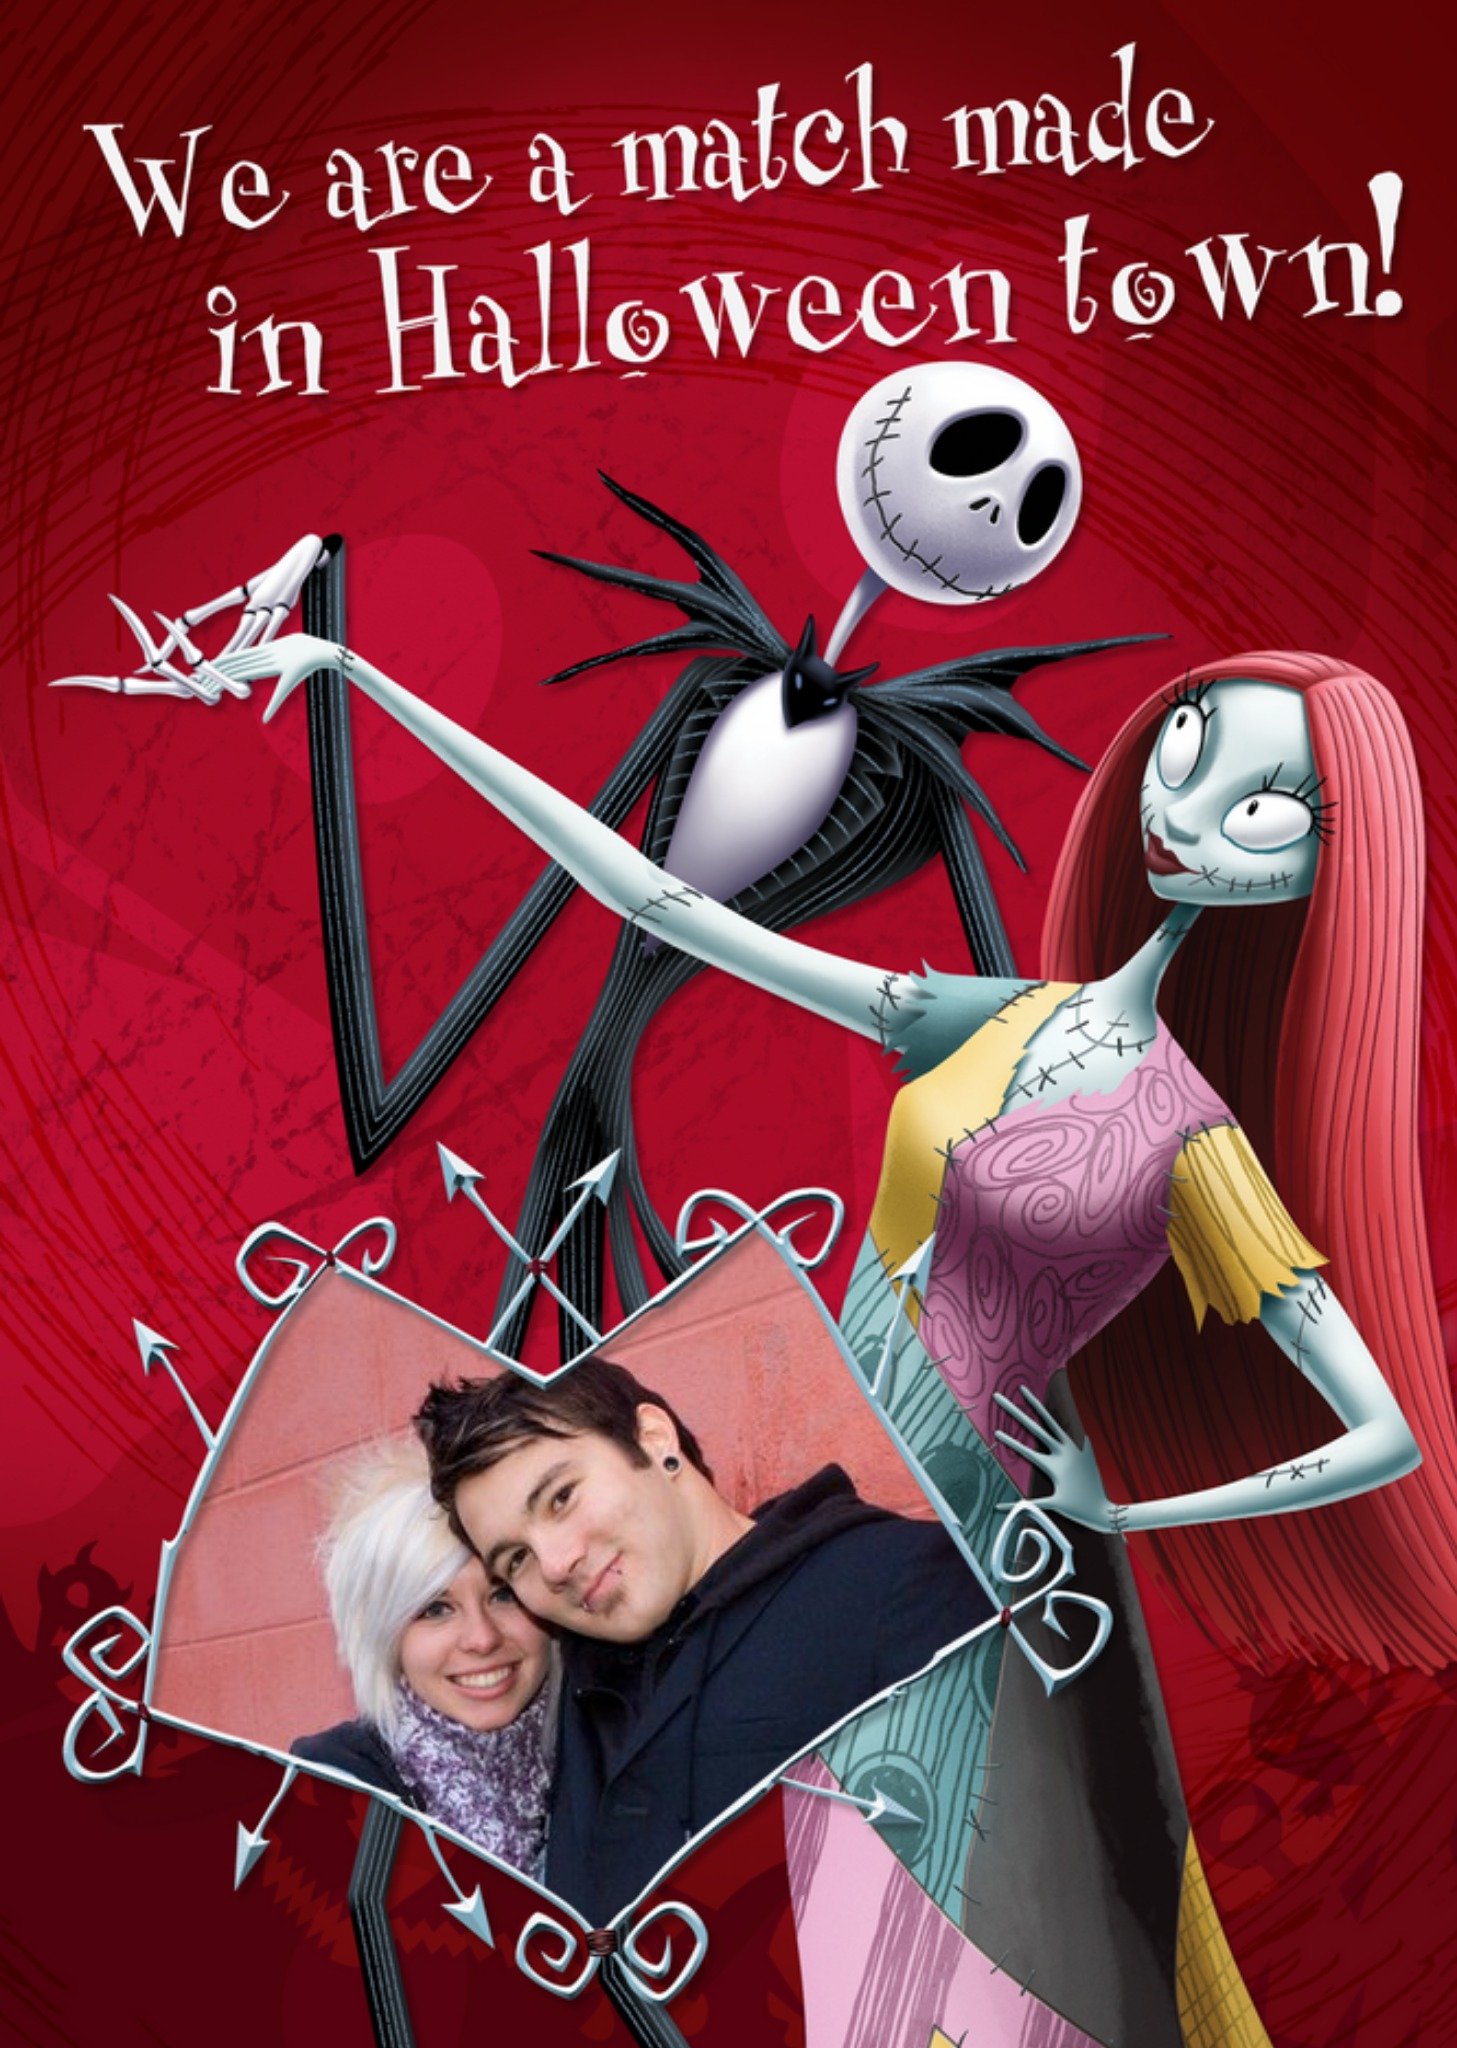 Other The Nightmare Before Xmas We Are A Match Made In Halloween Town Photo Card Ecard